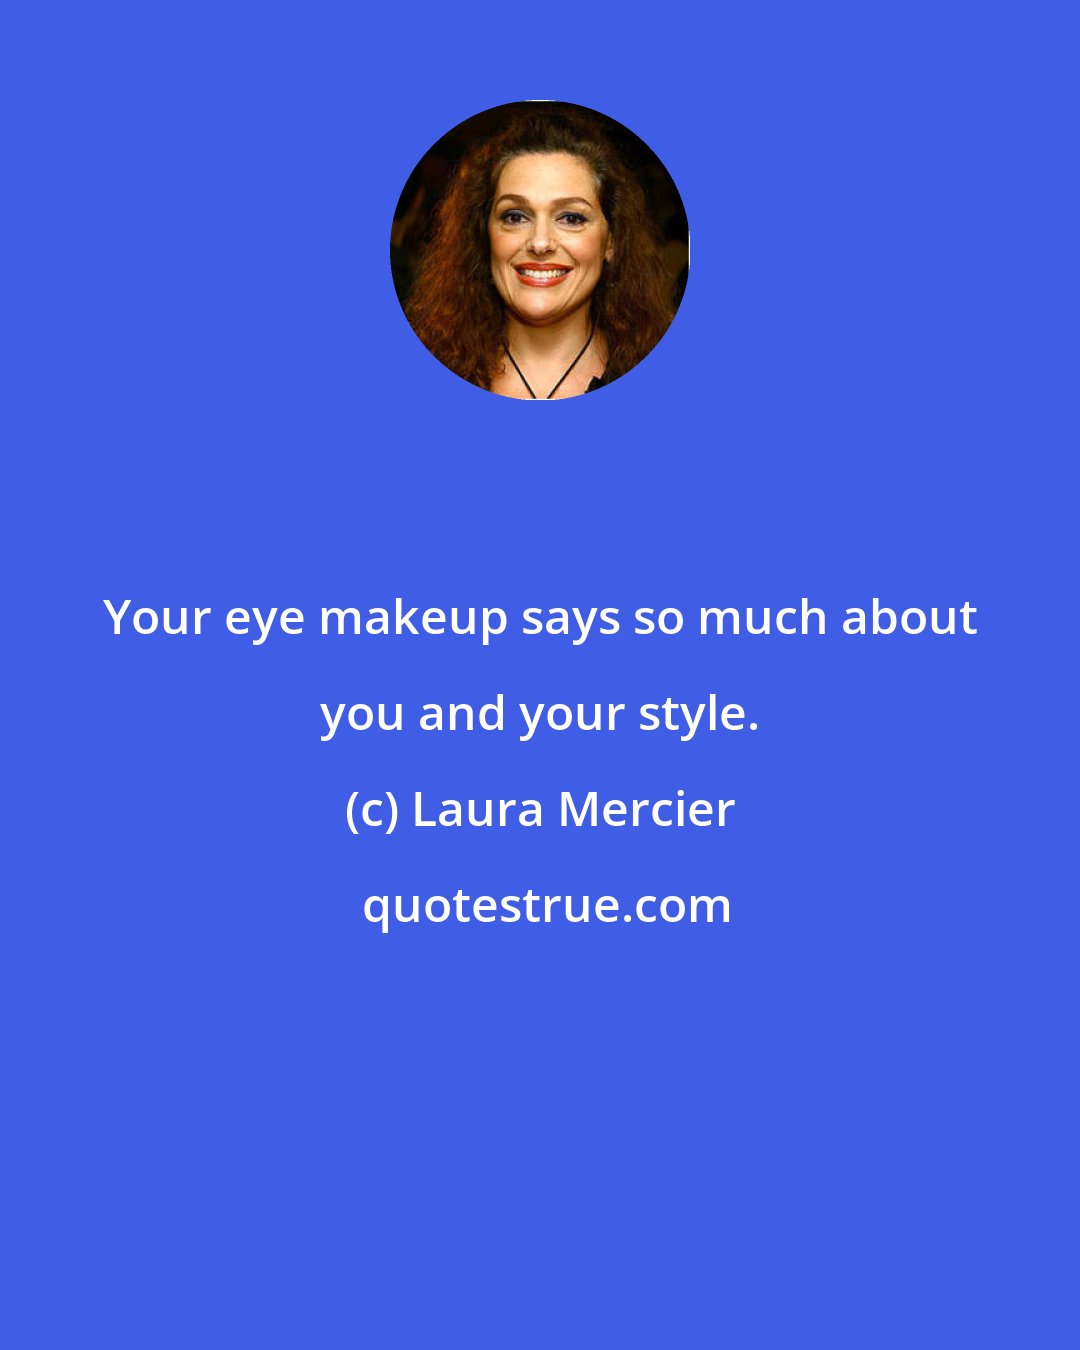 Laura Mercier: Your eye makeup says so much about you and your style.